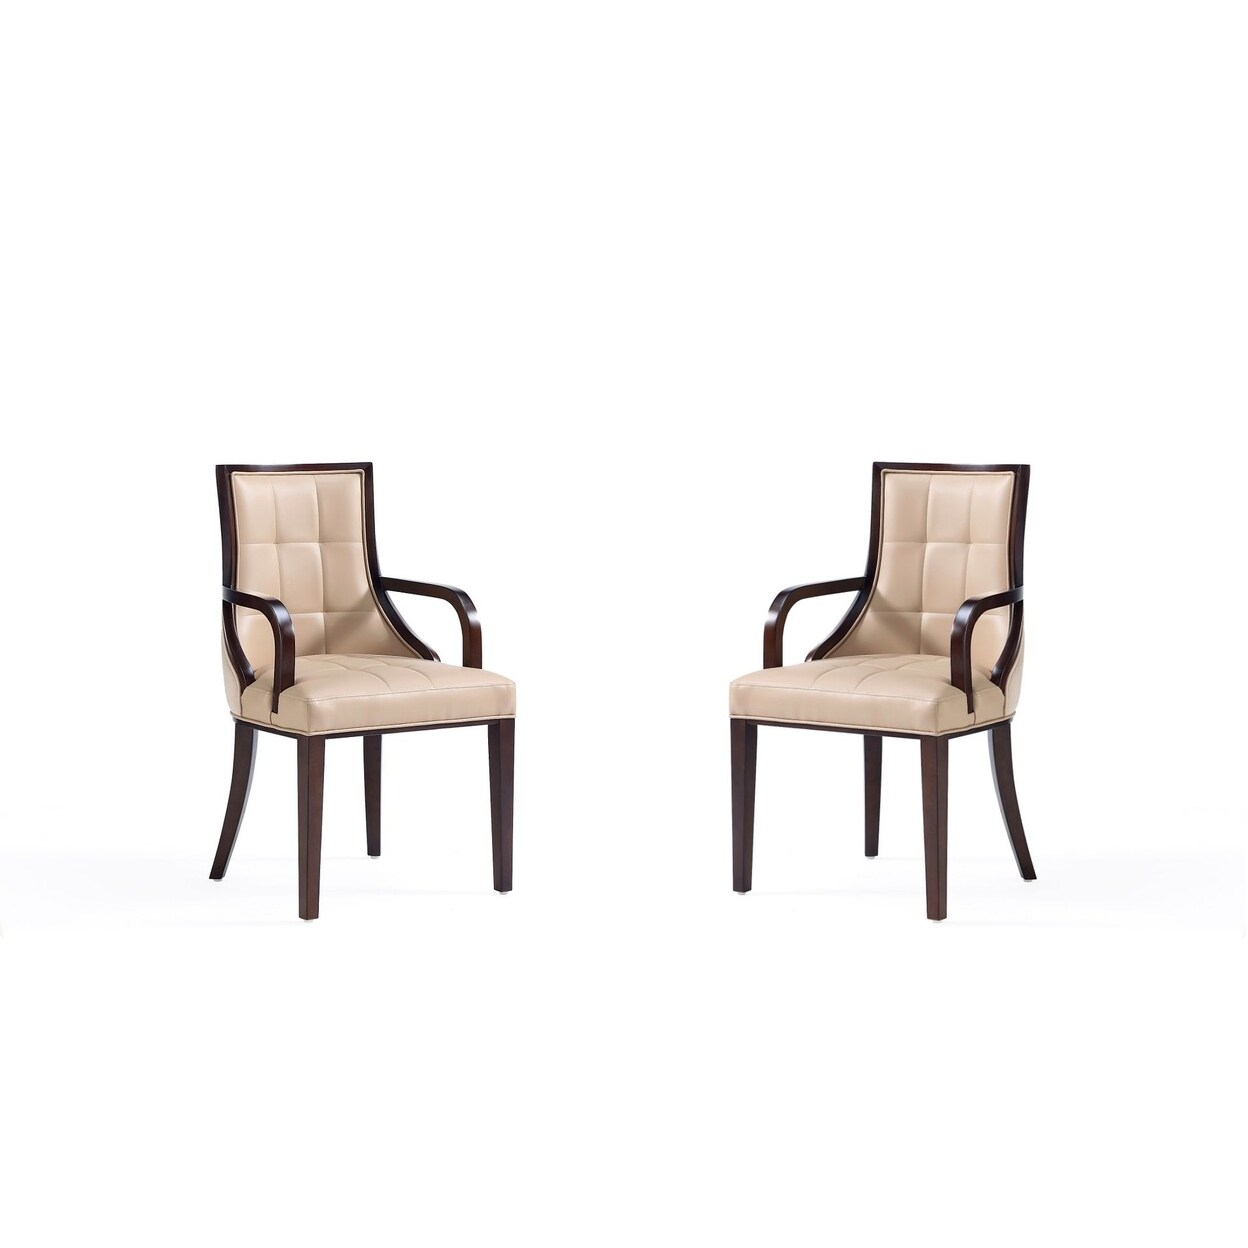 Manhattan Comfort Fifth Avenue Faux Leather Dining Armchair in Tan and Walnut (Set of 2)